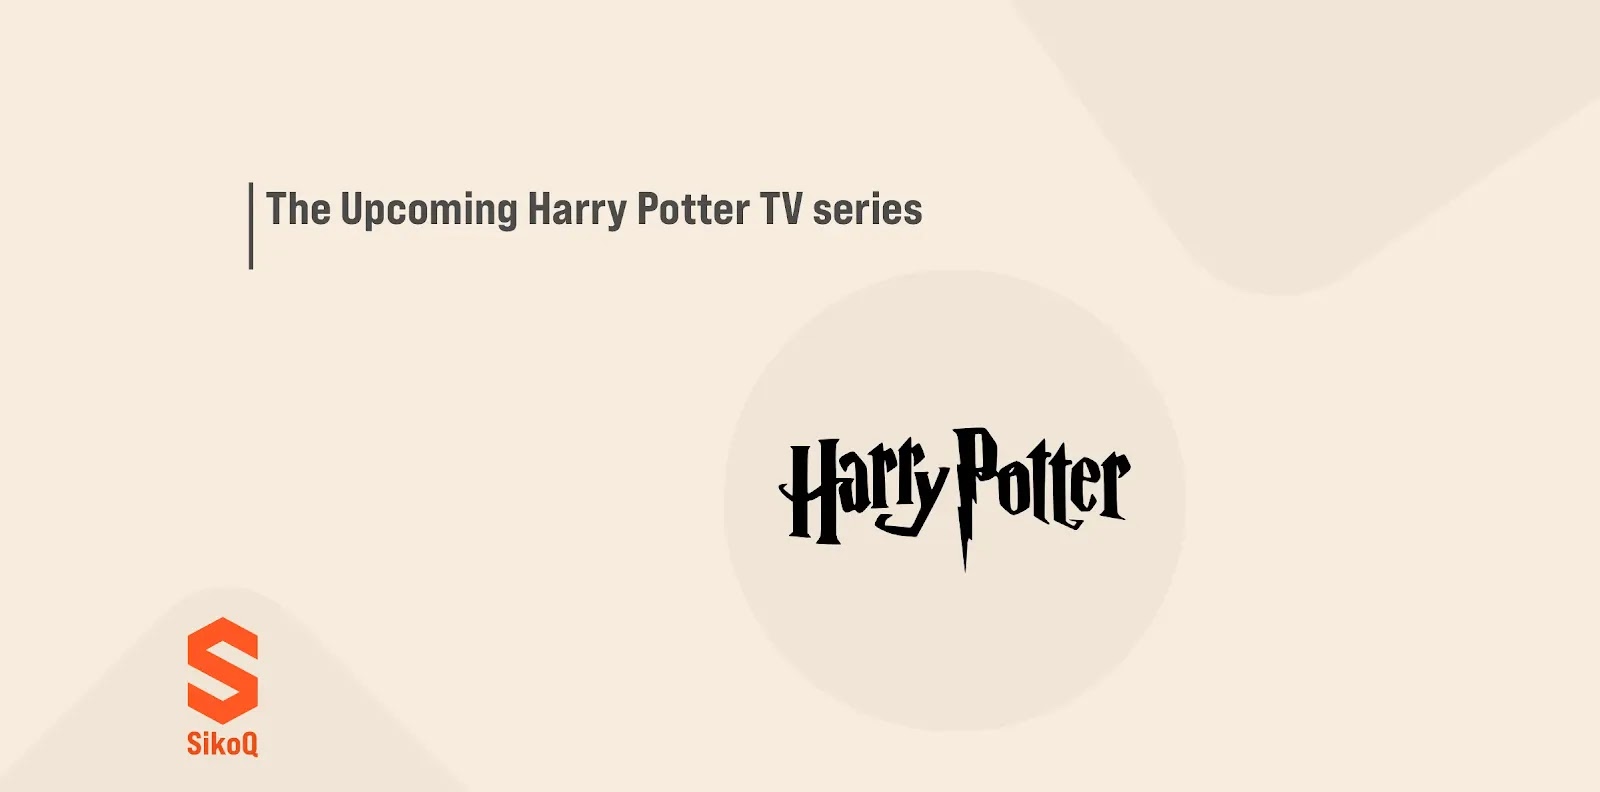 The Upcoming Harry Potter TV series